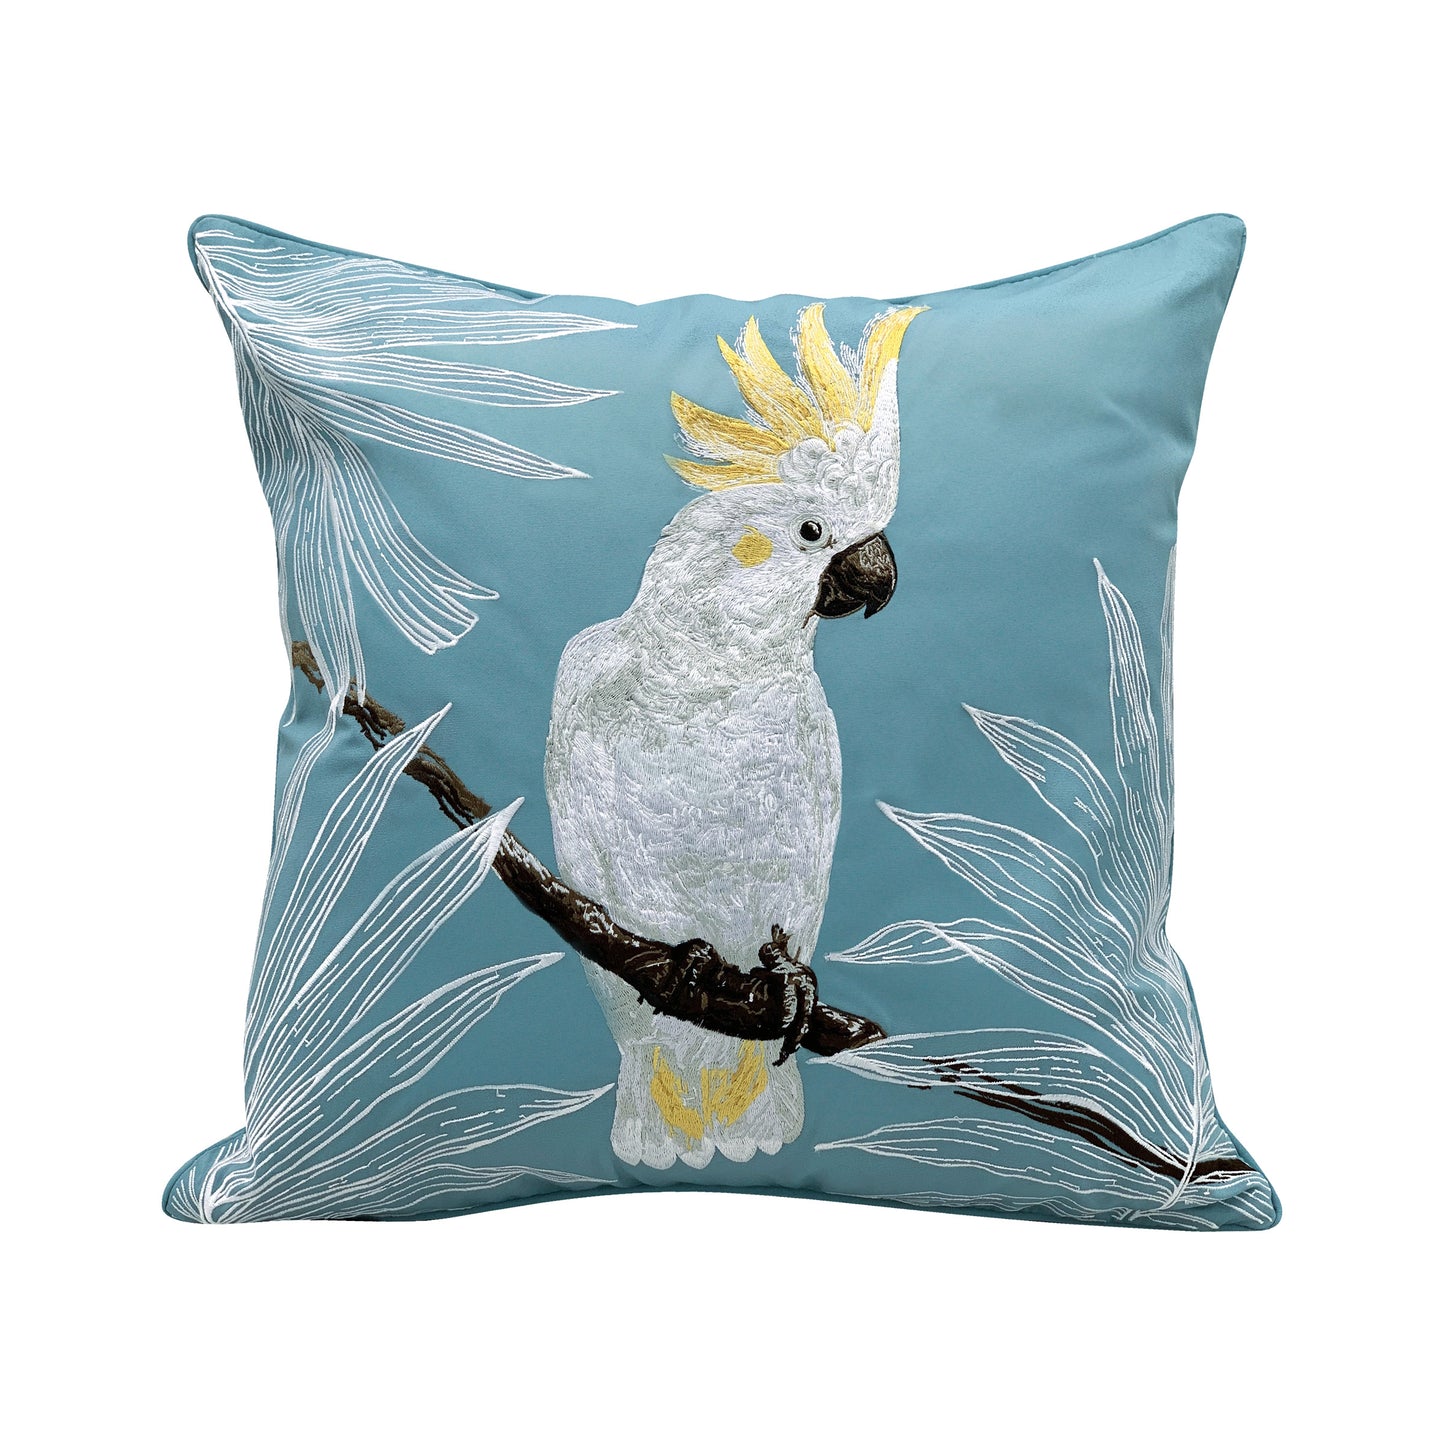 A white and yellow cockatoo sitting on a branch, flanked by tropical palm leaves. Embroidered on a blue background.